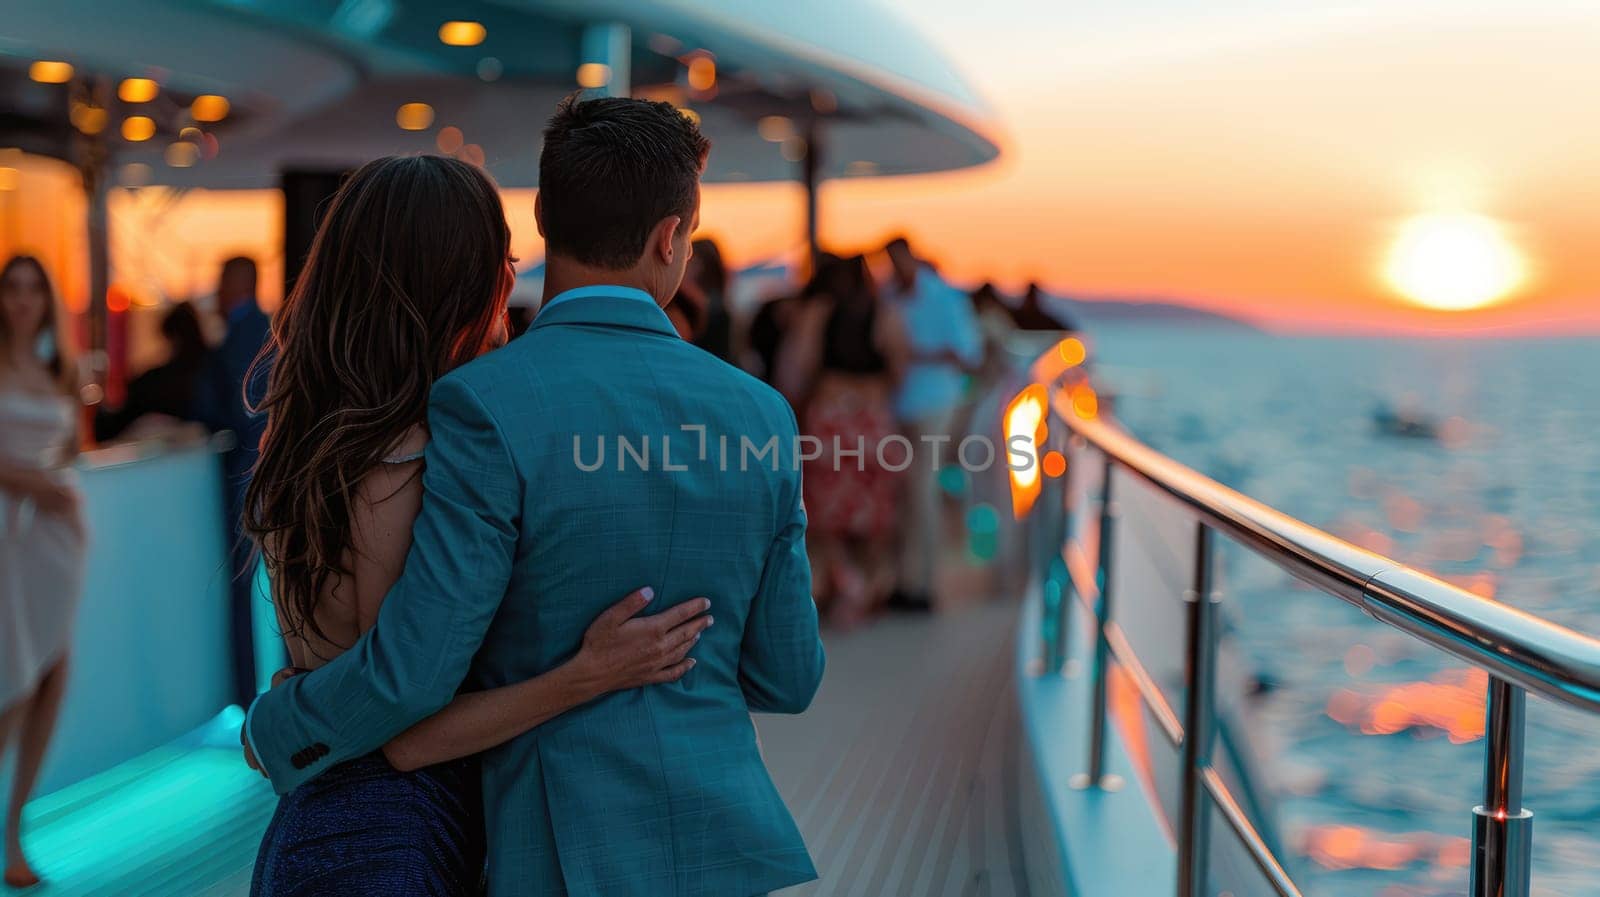 Party on a yacht. Boat yacht sailing in the sea at sunset on summer vacation AI